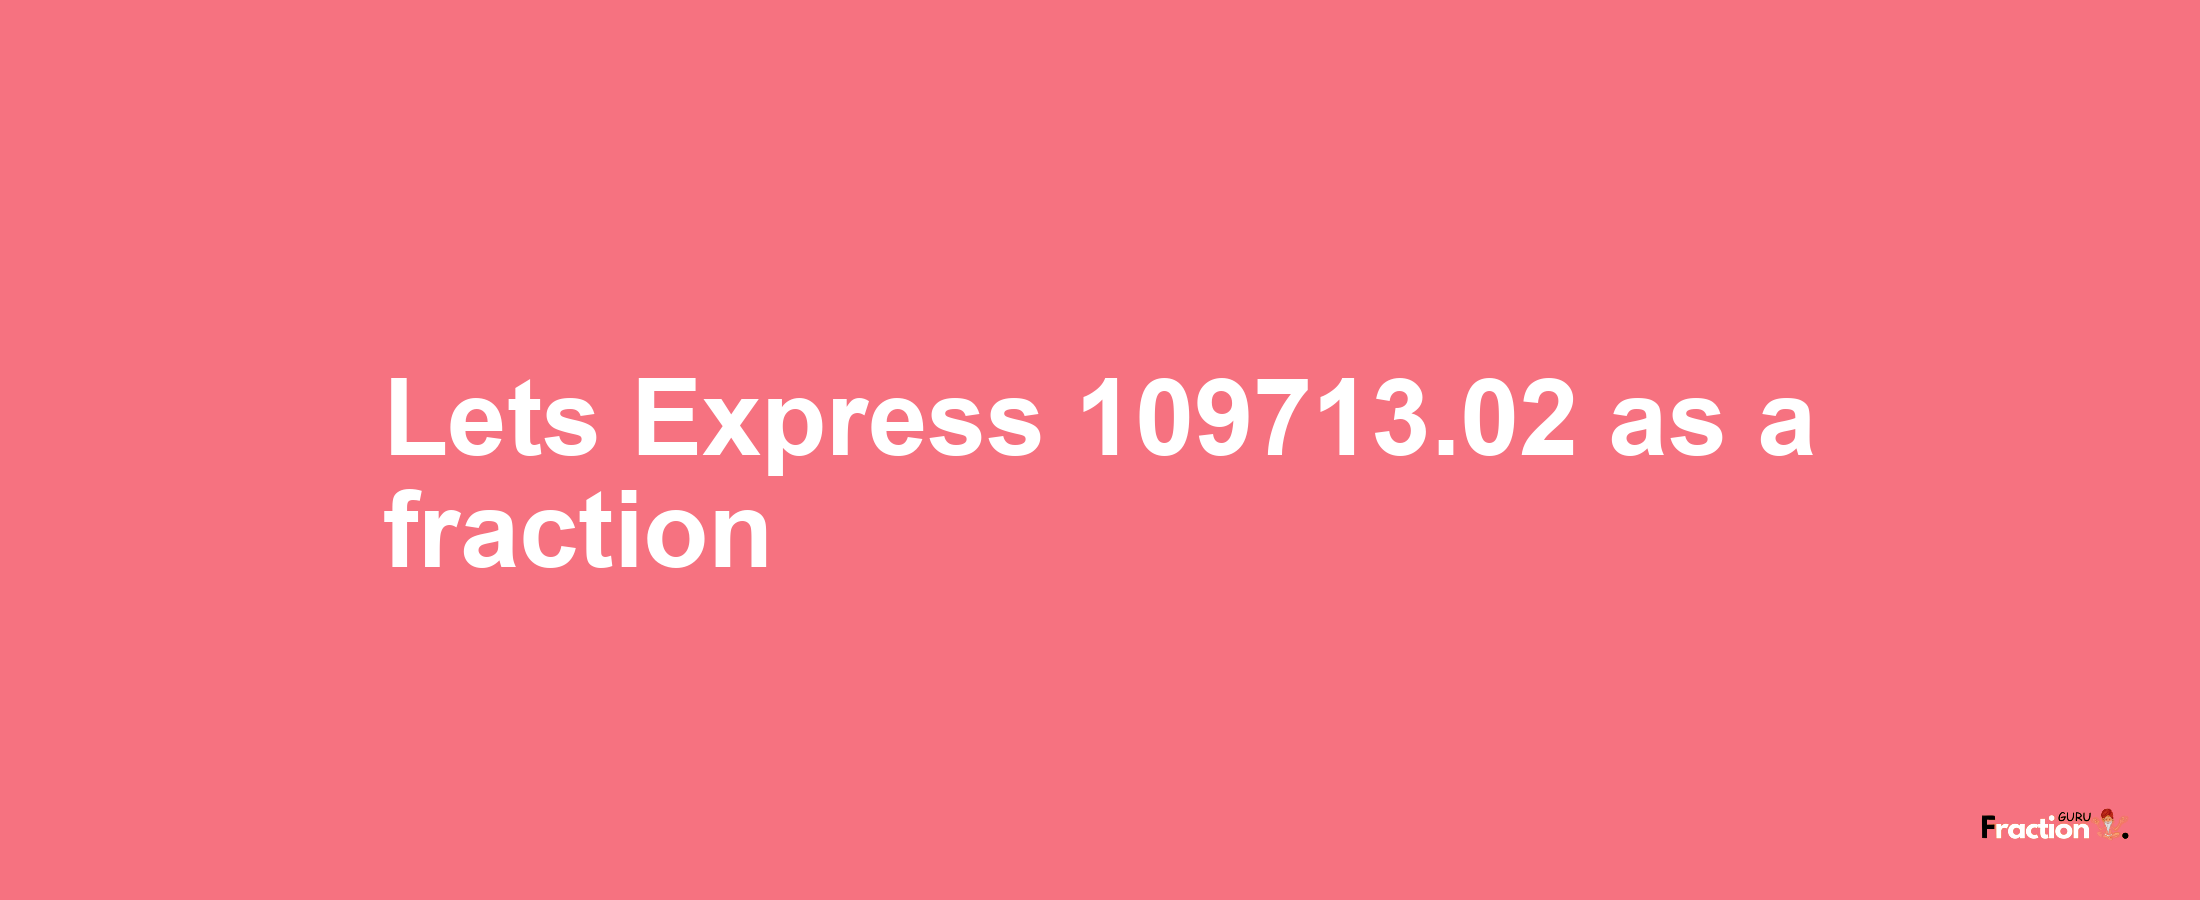 Lets Express 109713.02 as afraction